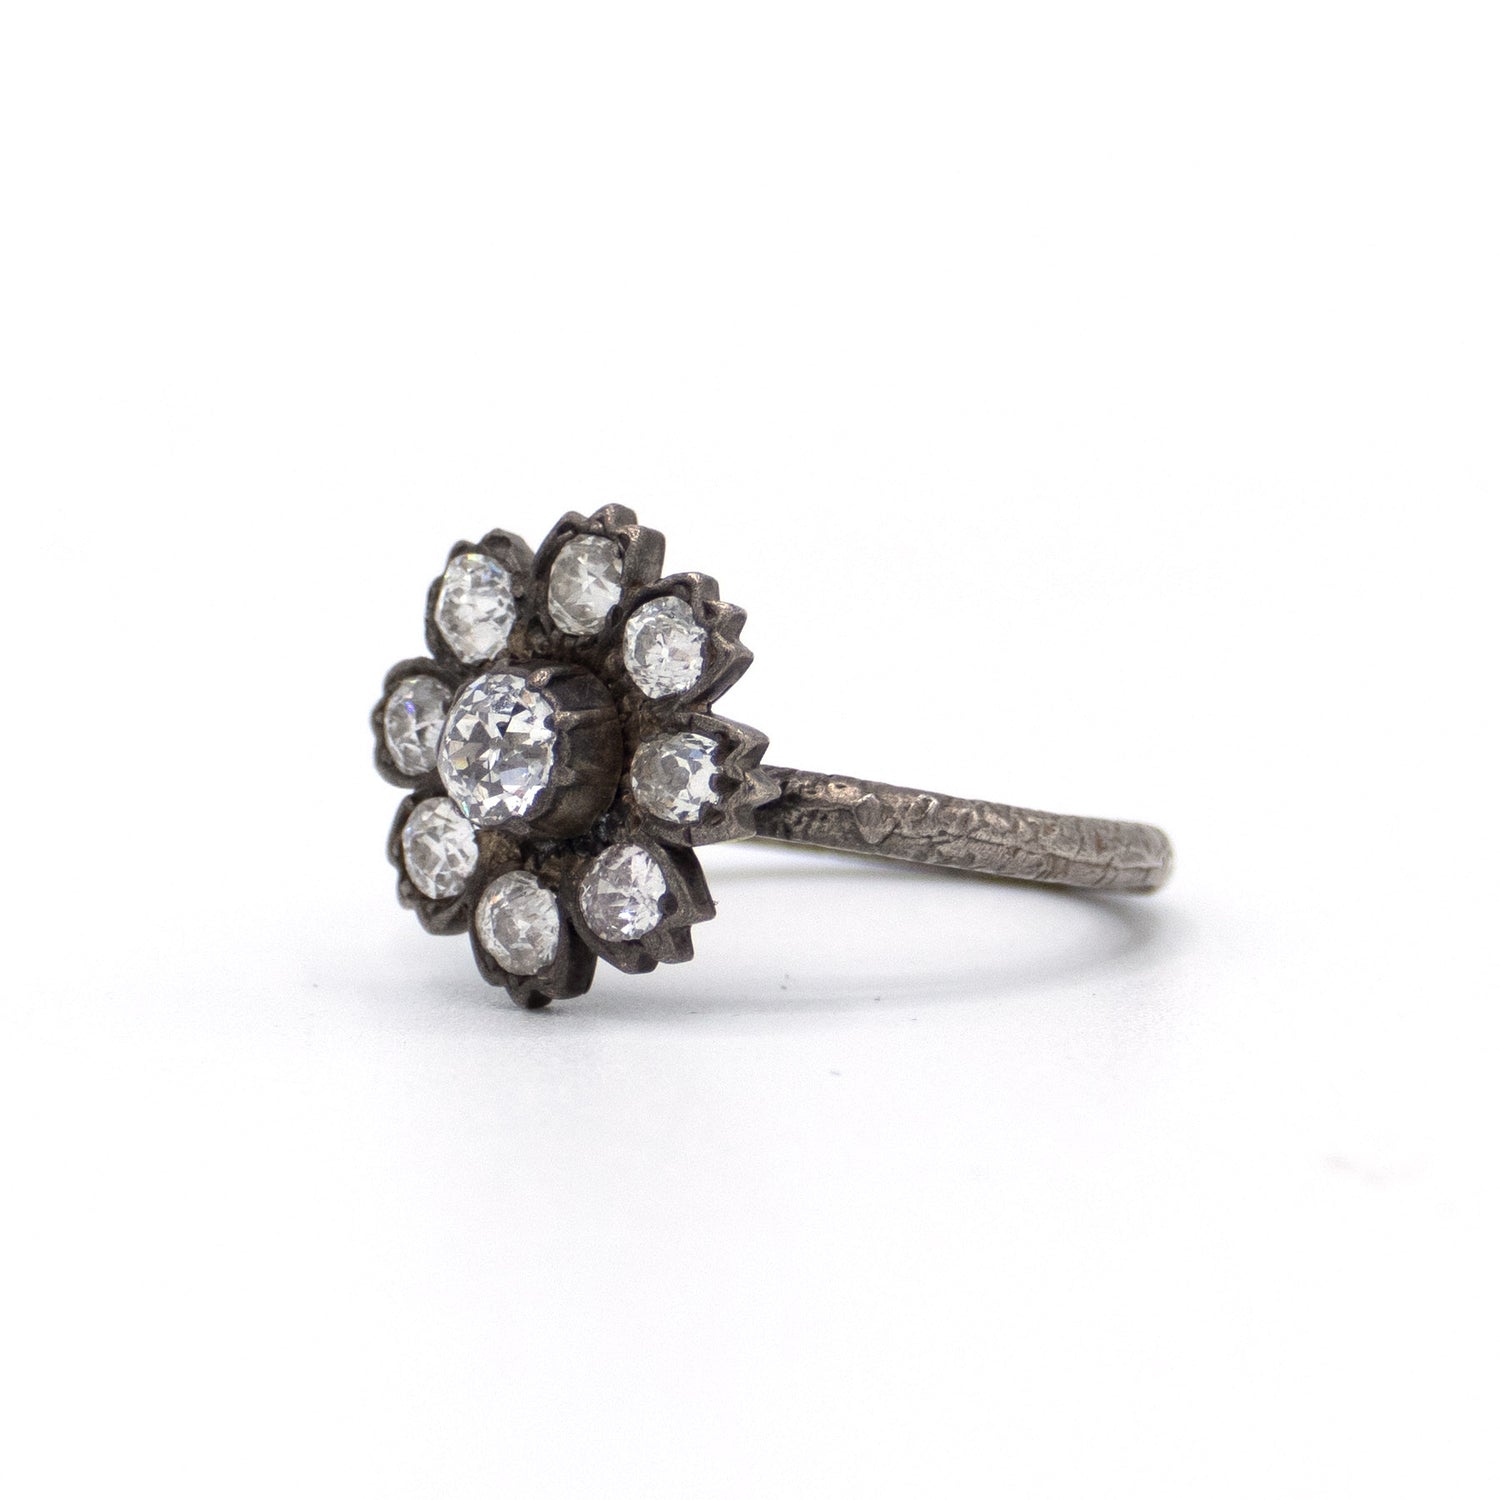 Irit Designs Vintage Diamond and Sterling Silver Flower Ring